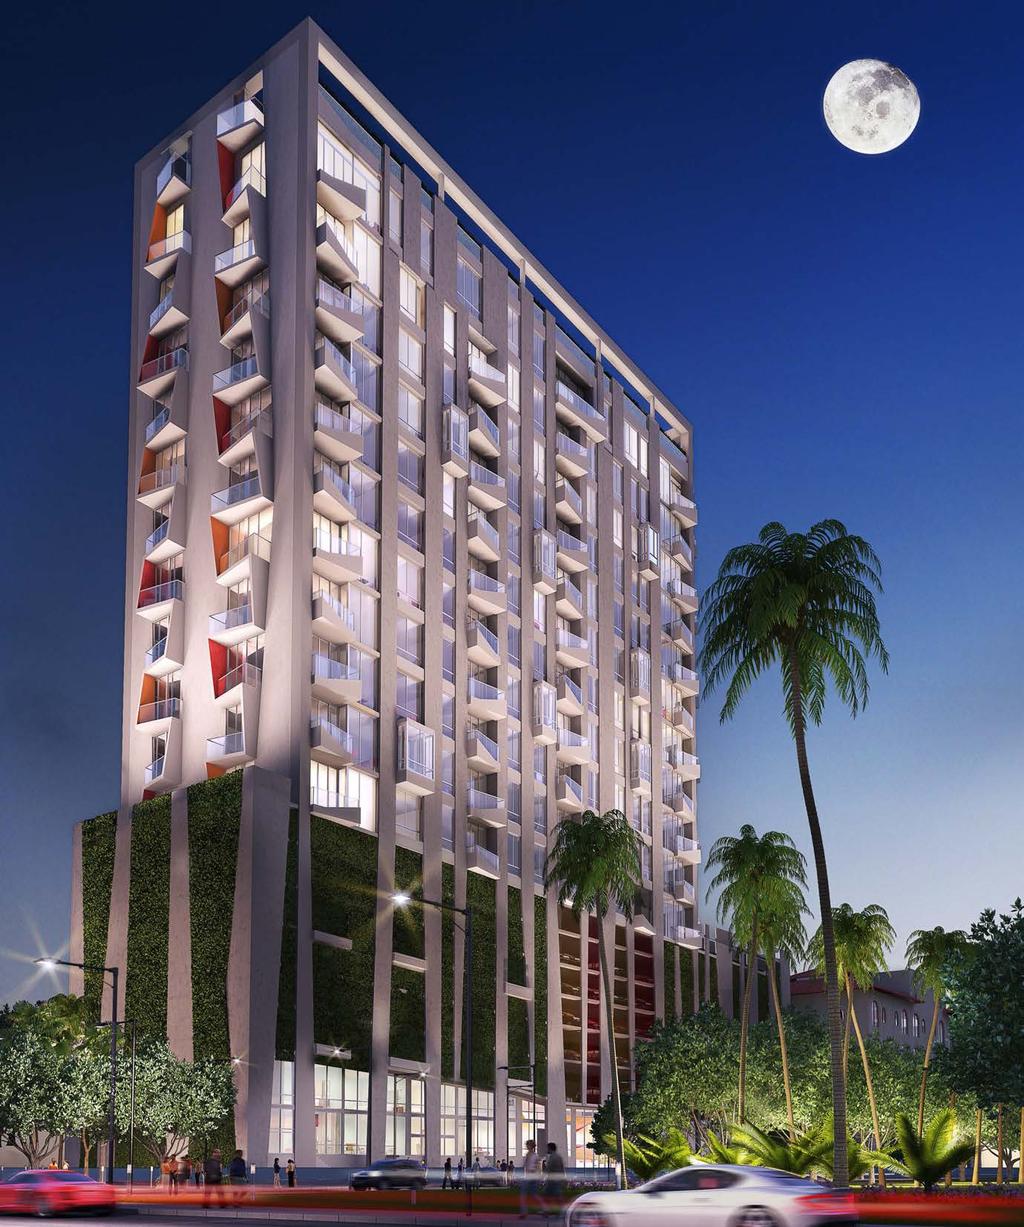 On the bay of Edgewater, Miami s newest and most desirable neighborhood, stands a property where a new standard of sophistication and boutique style living will reside : The Crimson.